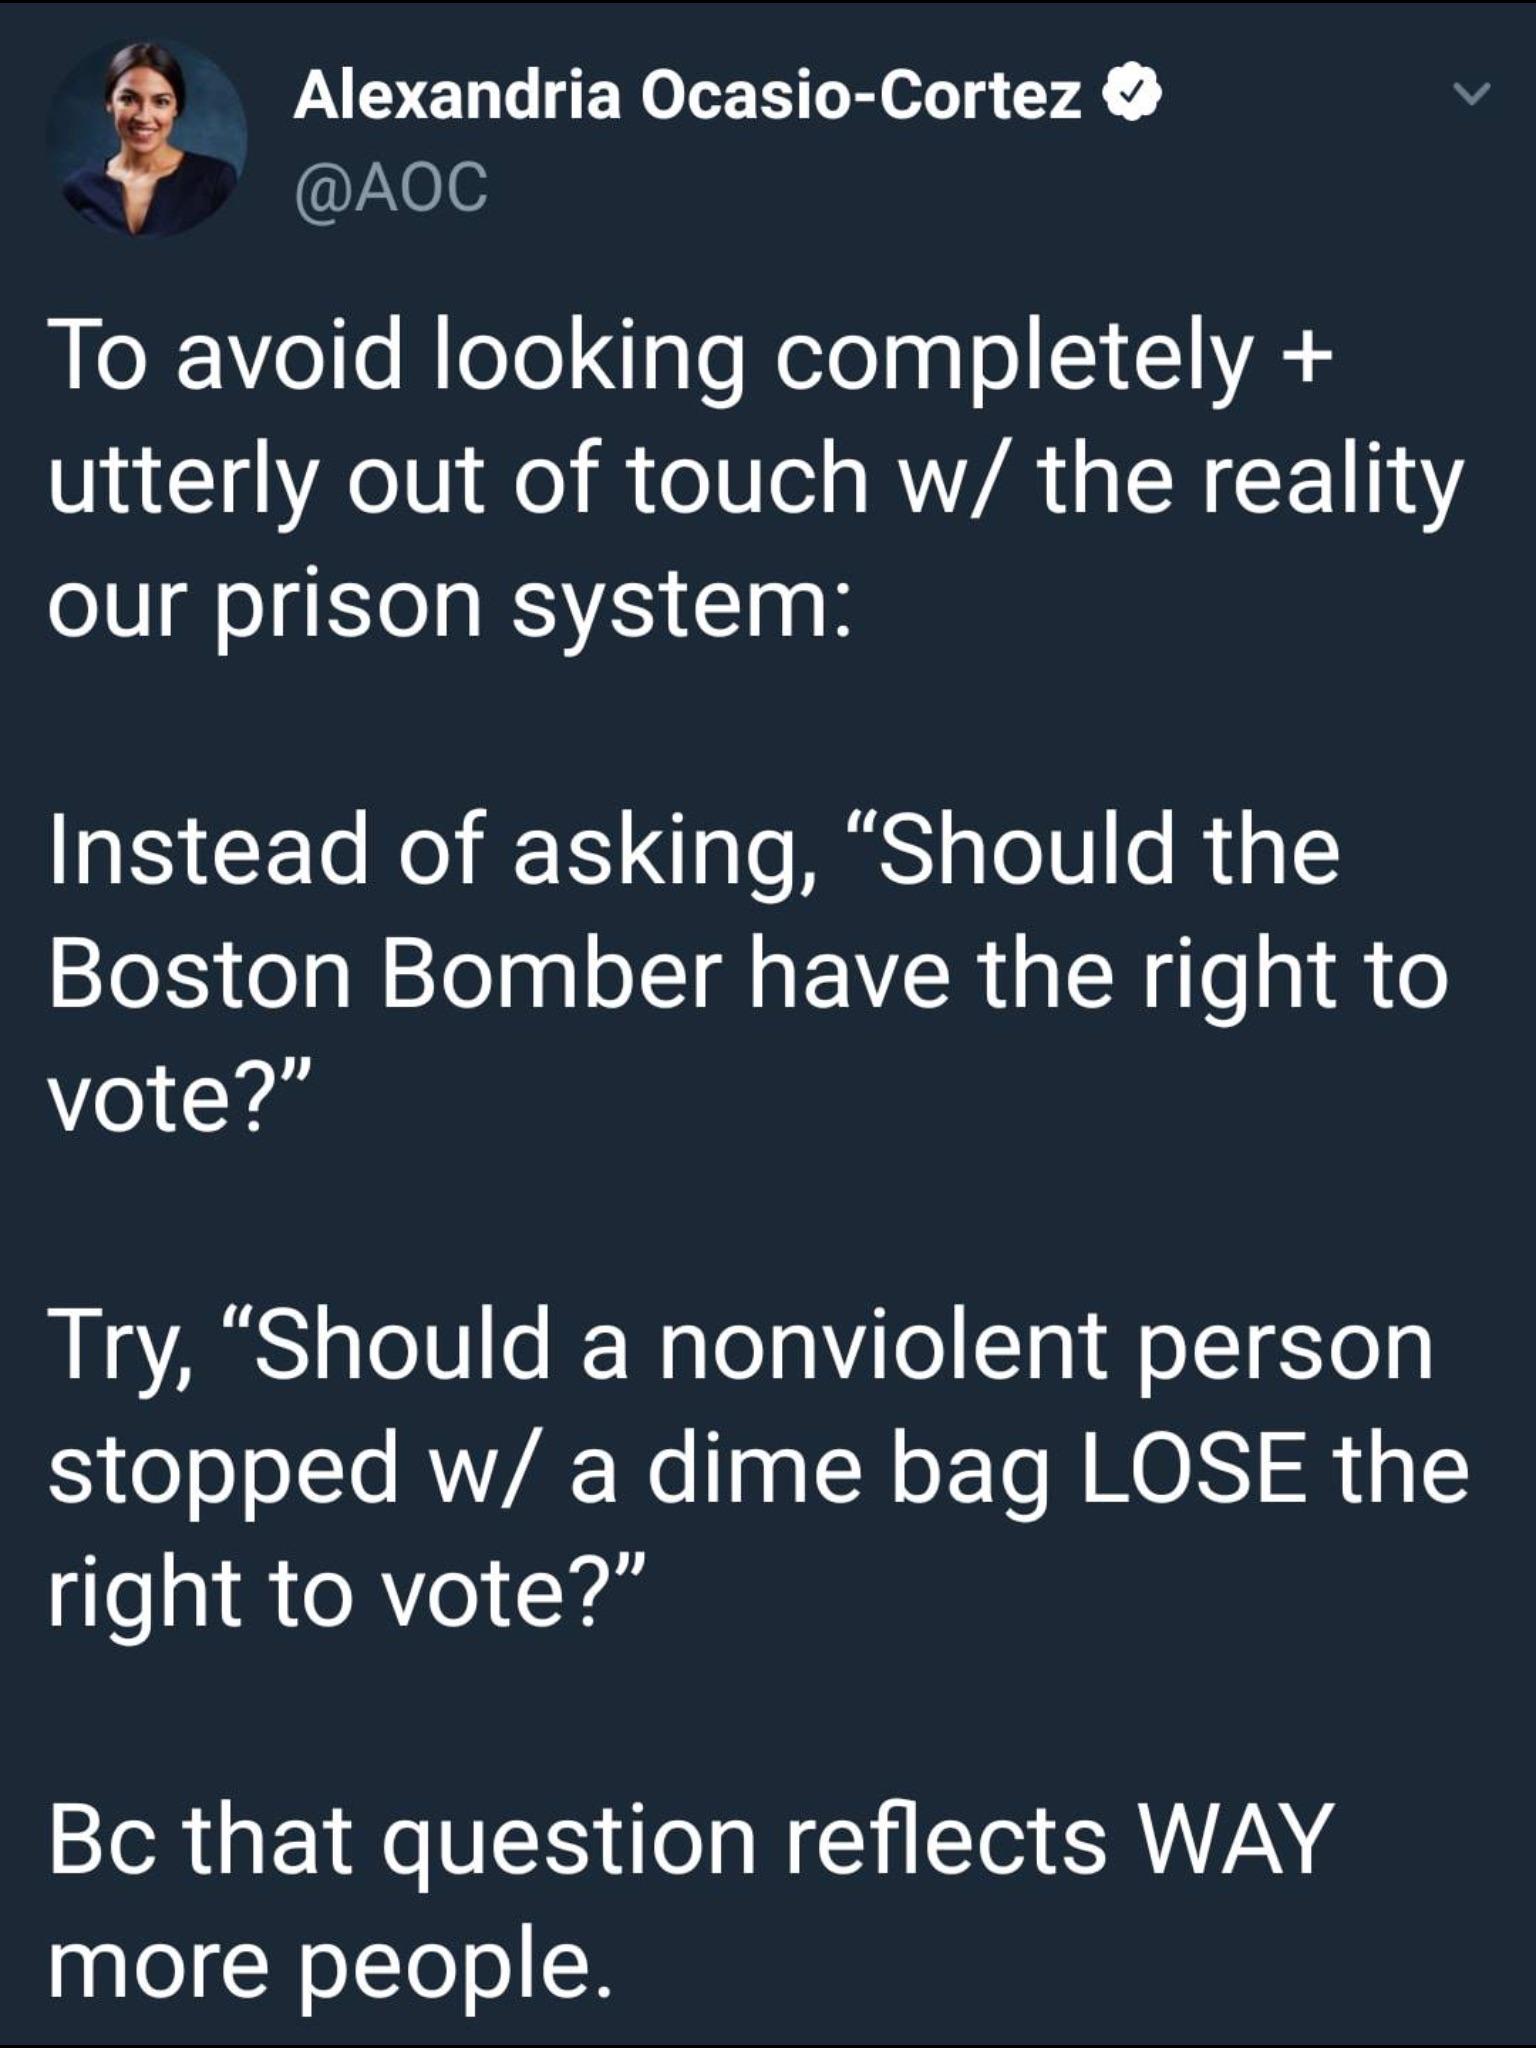 angle - Alexandria OcasioCortez To avoid looking completely utterly out of touch w the reality our prison system Instead of asking, Should the Boston Bomber have the right to vote?" Try, Should a nonviolent person stopped w a dime bag Lose the right to vo